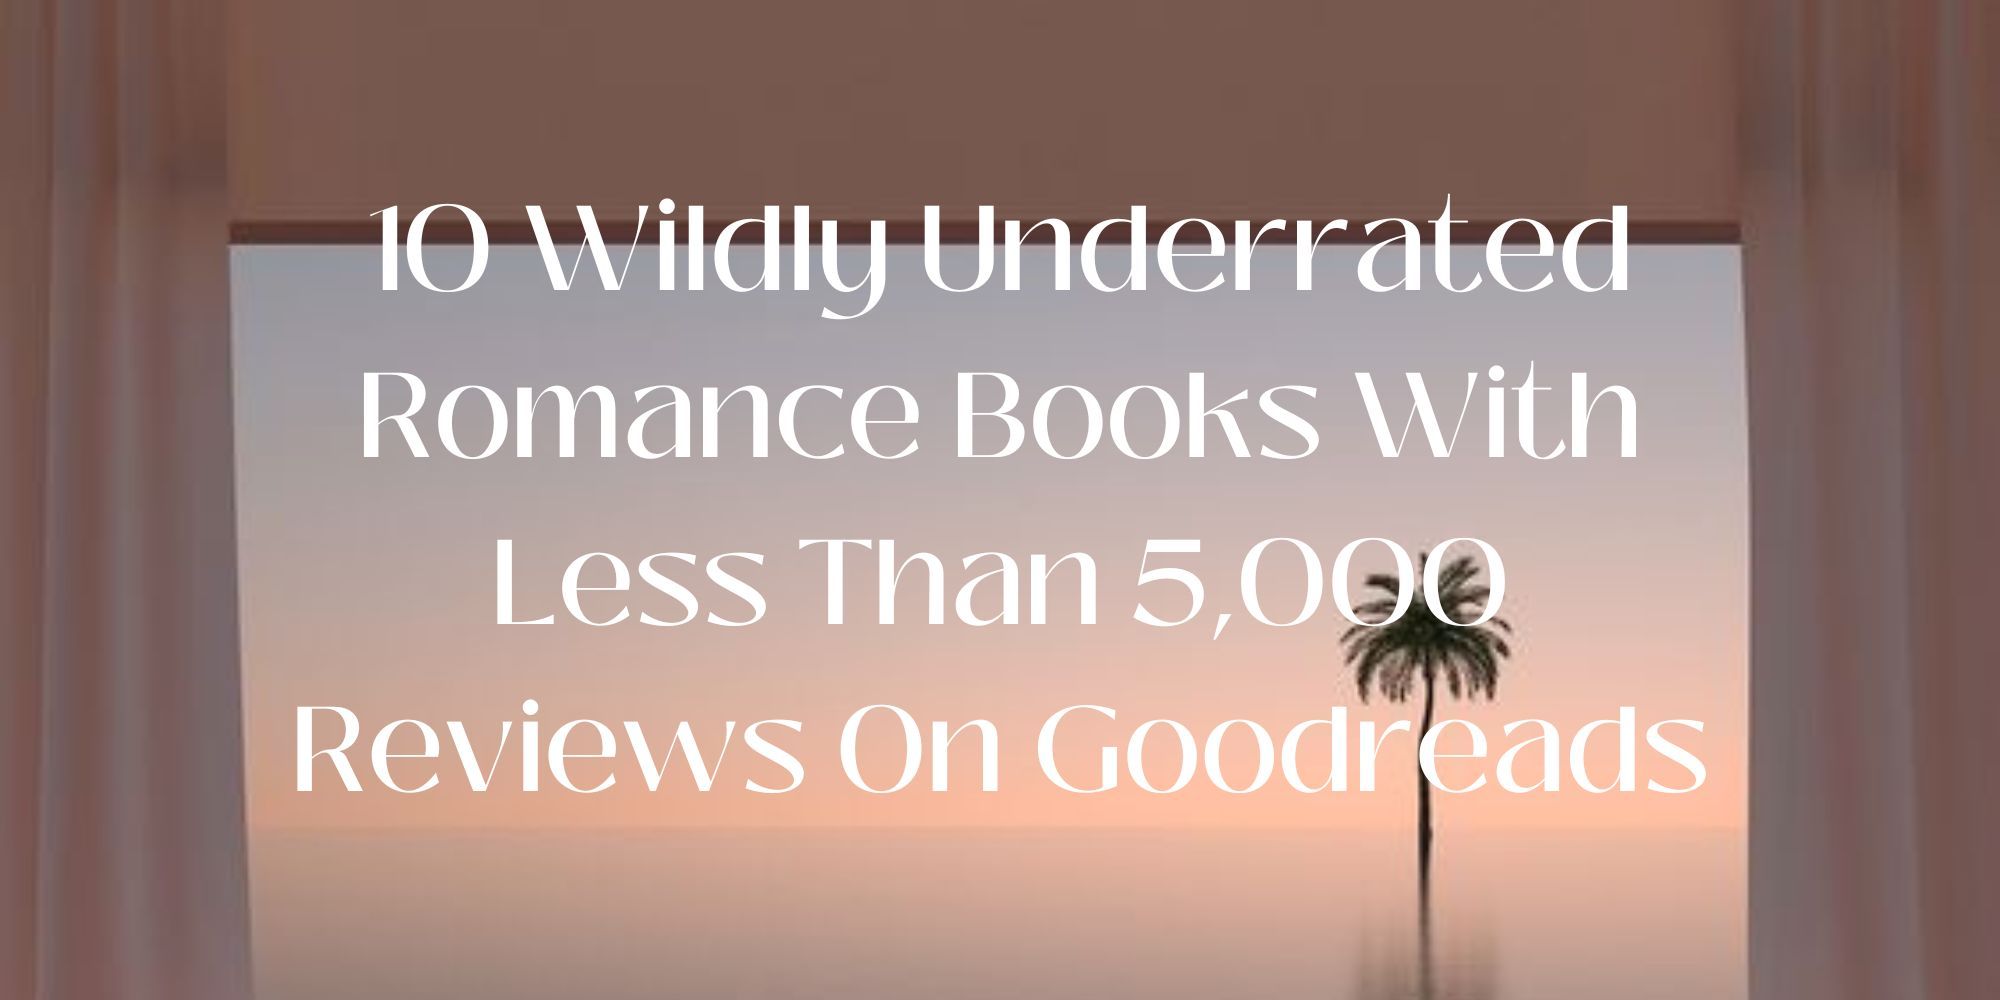 10 Wildly Underrated Romance Books With Less Than 5,000 Reviews On Goodreads